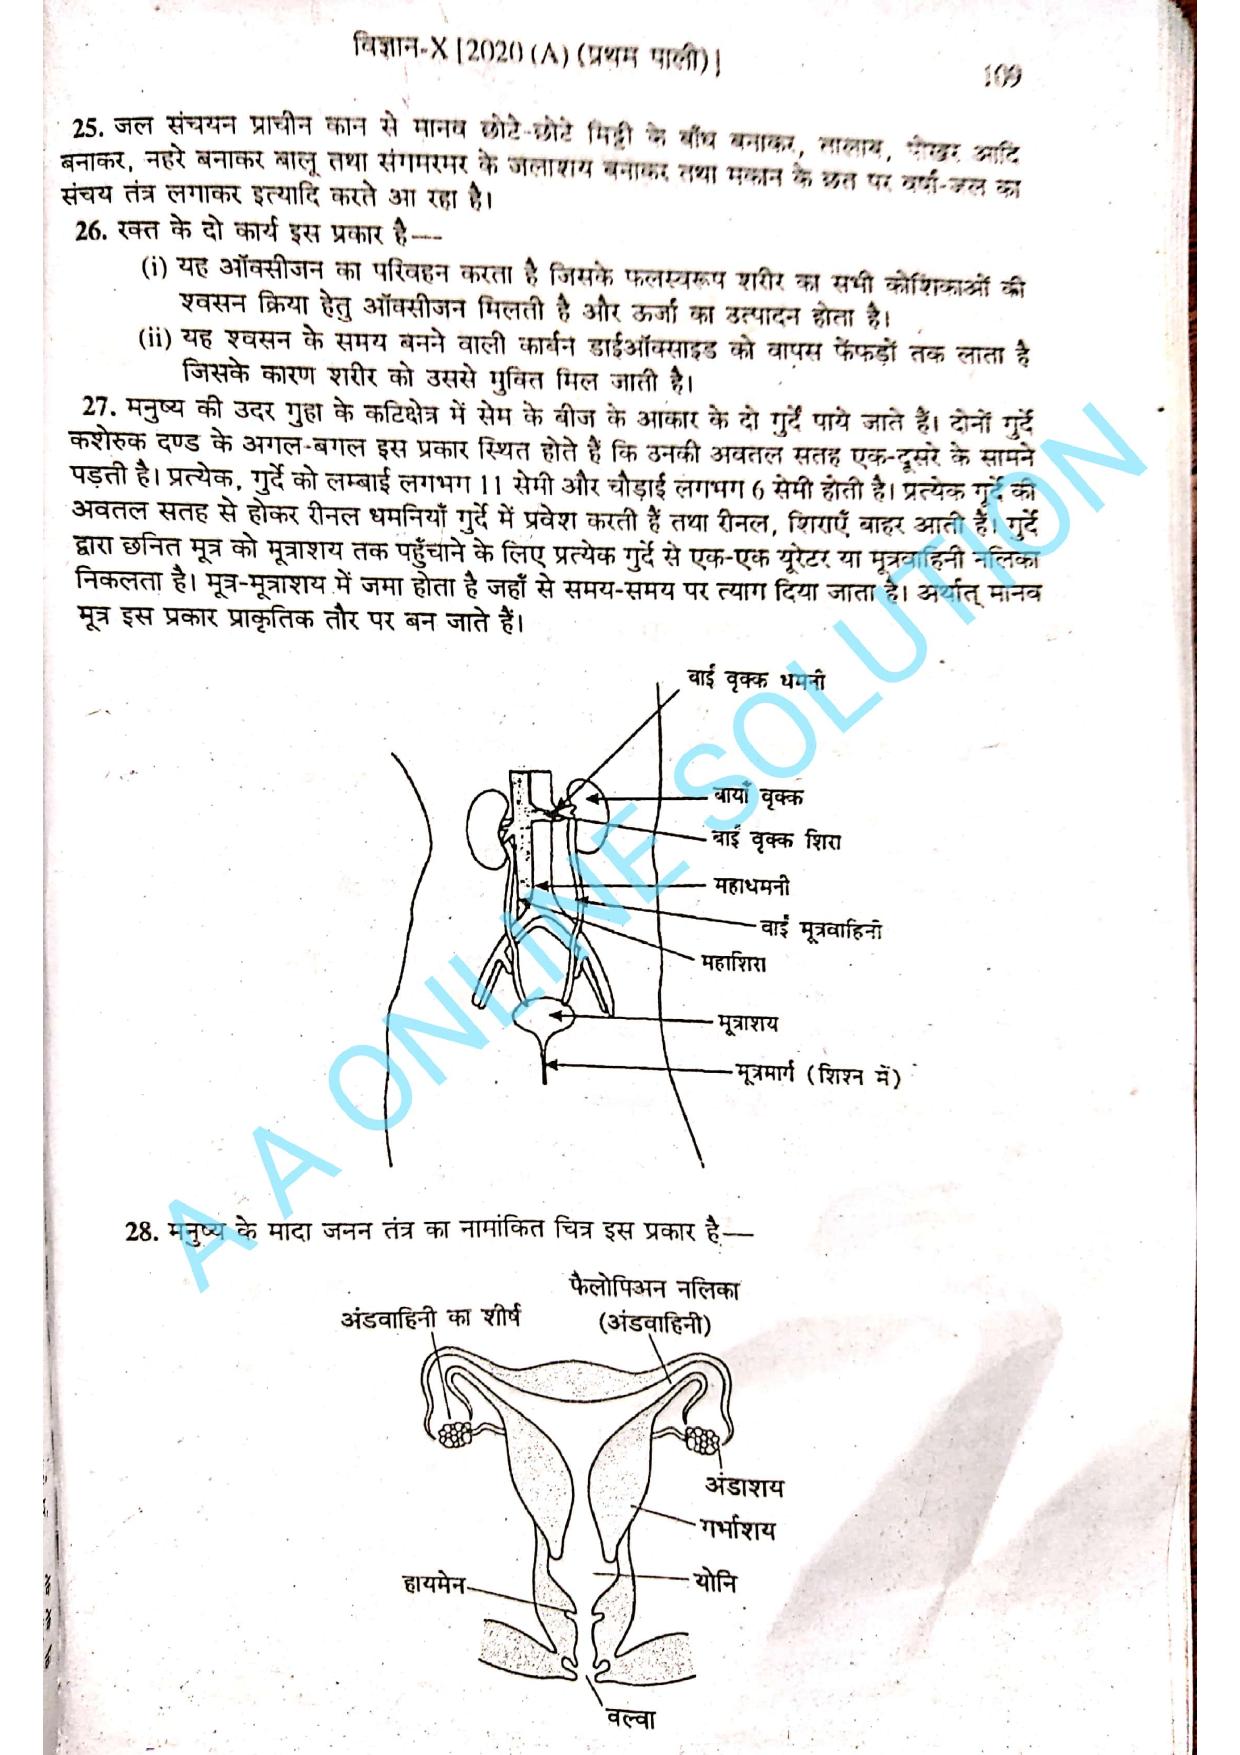 Bihar Board Class 10 Science 2020 (1st Sitting) Question Paper - Page 9